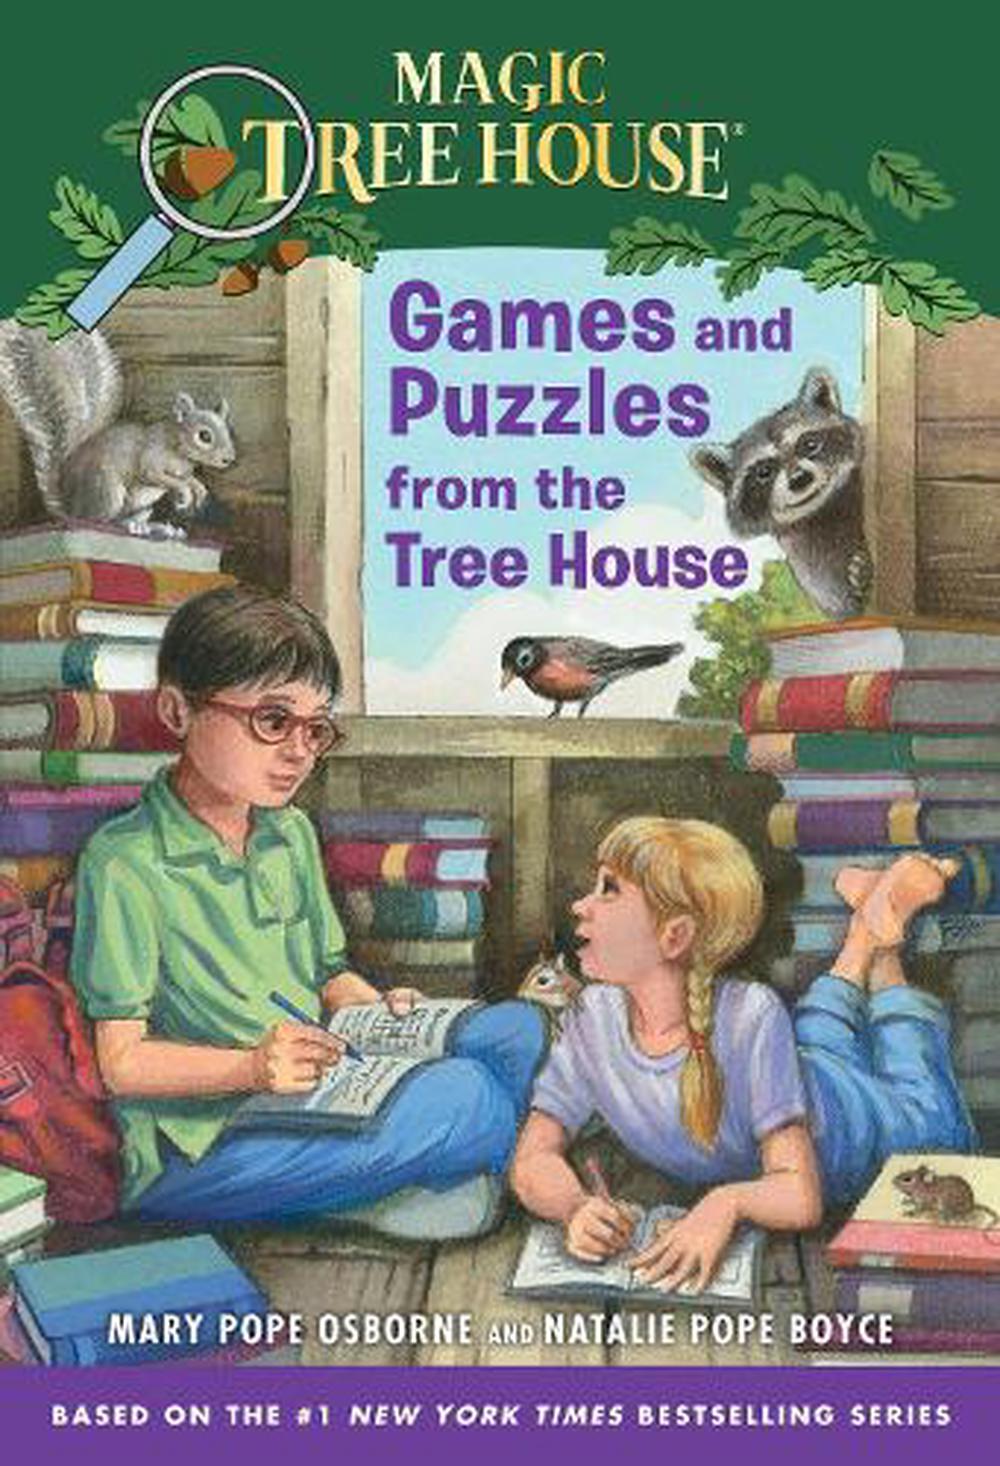 Games and Puzzles from the Tree House: Over 200 Challenges! -- Mary Pope Osborne - image 1 of 1